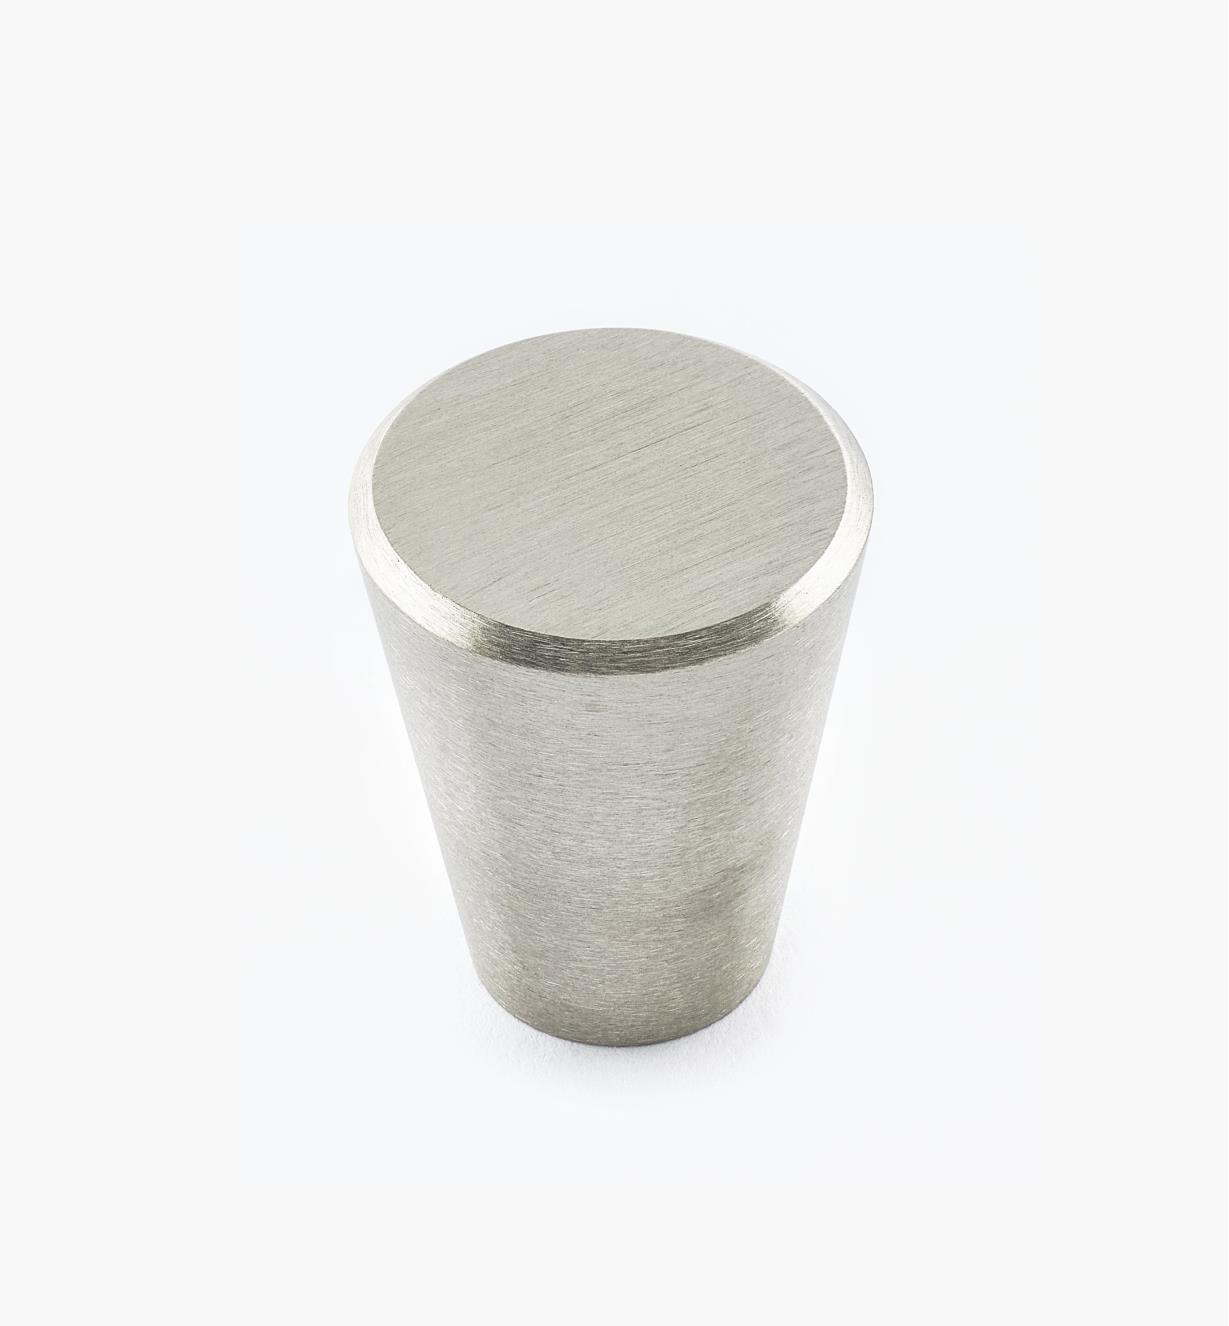 01W6351 - 24mm x 29mm Stainless Steel Tapered Knob